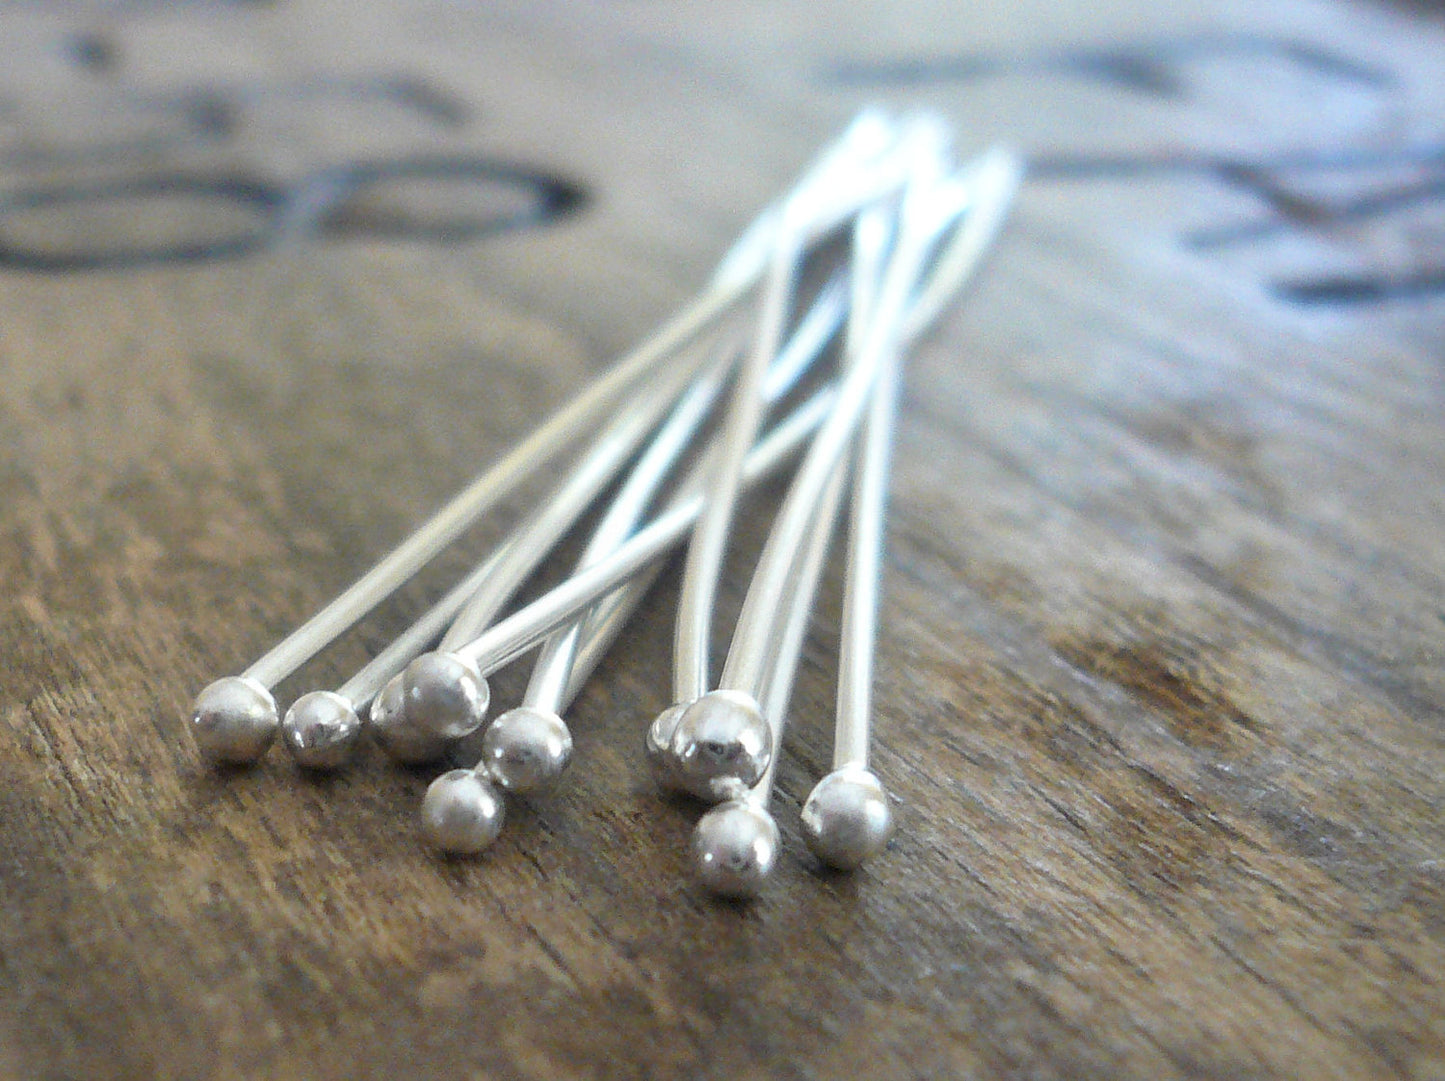 10 2" Fine Silver 24 GAUGE Handmade Ball Headpins - 2 inches. Oxidized and polished